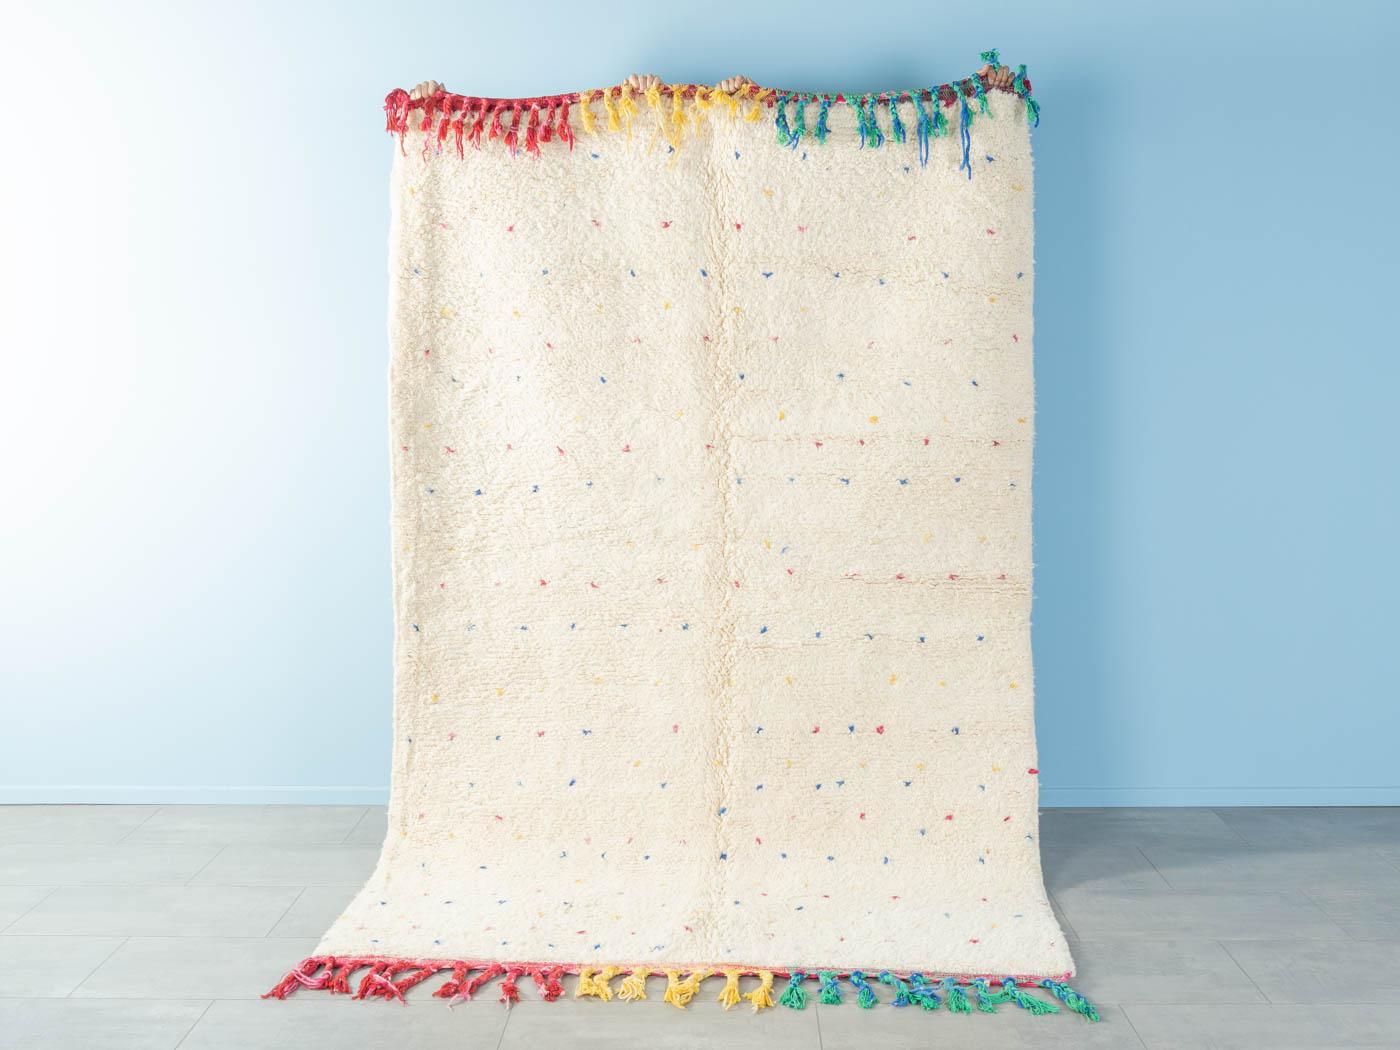 Happy Polka Dots is a contemporary 100% wool rug – thick and soft, comfortable underfoot. Our Berber rugs are handwoven and handknotted by Amazigh women in the Atlas Mountains. These communities have been crafting rugs for thousands of years. One